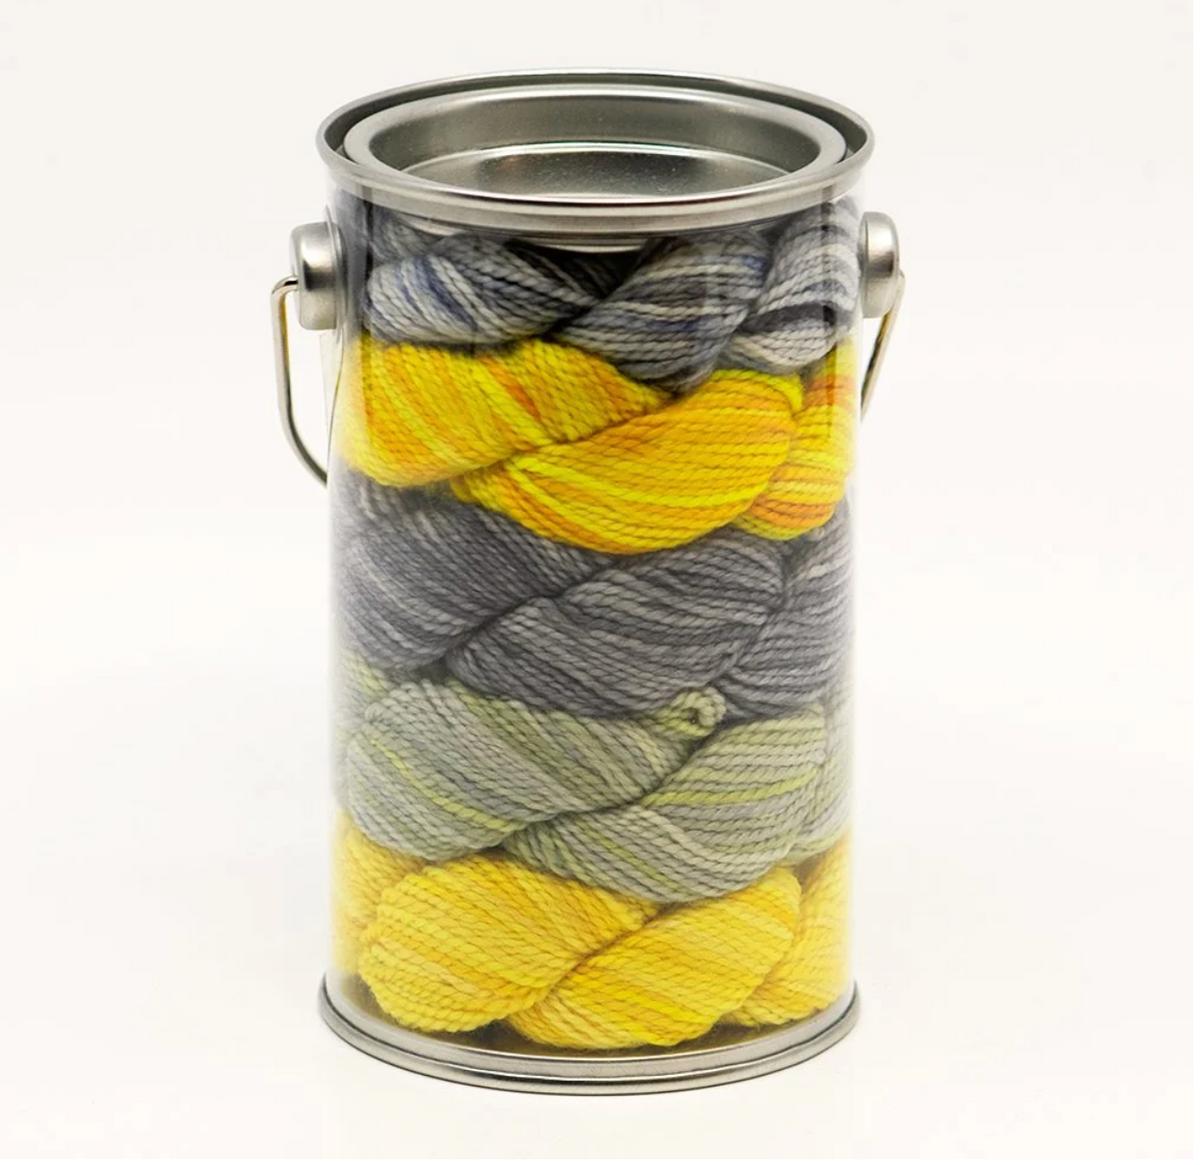 Koigu Pain Cans - YourNextKnit